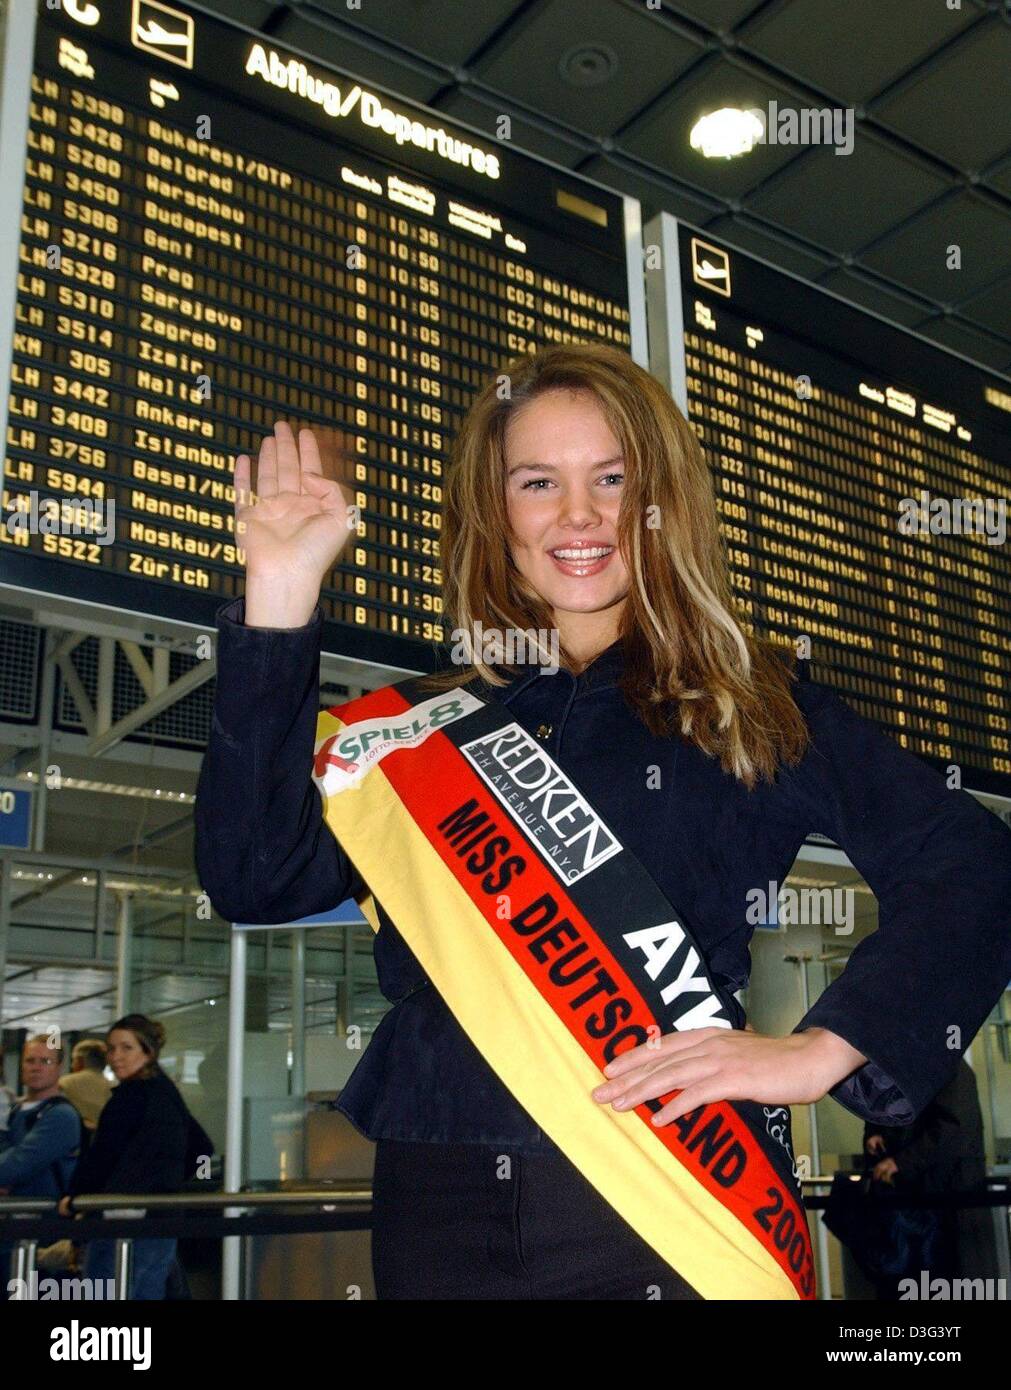 (dpa) - Alexandra Vodjanikova, the current 'Miss Germany', is posing in front of an annunciator panel at Munich airport, 19 February 2003. The 19-year-old is going to Baghdad on a peace mission. Her manager Oswald informed that a meeting with Saddam Hussein is part of her itinerary. Stock Photo